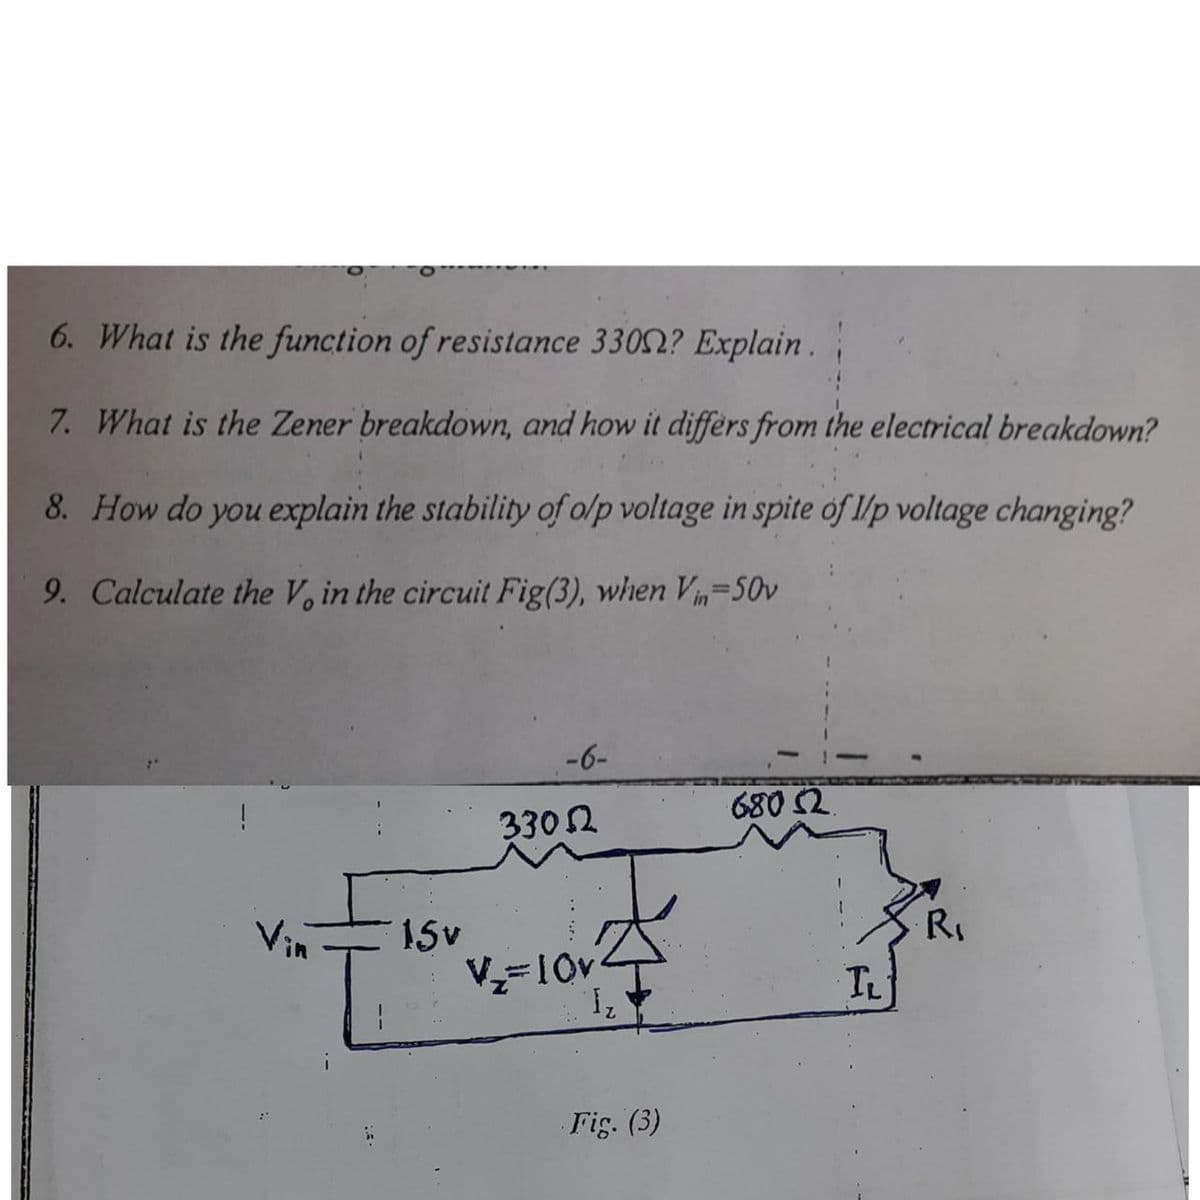 6. What is the function of resistance 3302? Explain .
7. What is the Zener breakdown, and how it differs from the electrical breakdown?
8. How do you explain the stability of o/p voltage in spite of l/p voltage changing?
9. Calculate the V, in the circuit Fig(3), when Vin=50v
-6-
680 2
3302
Vin
15v
R.
V=10v
TL
Fig. (3)
